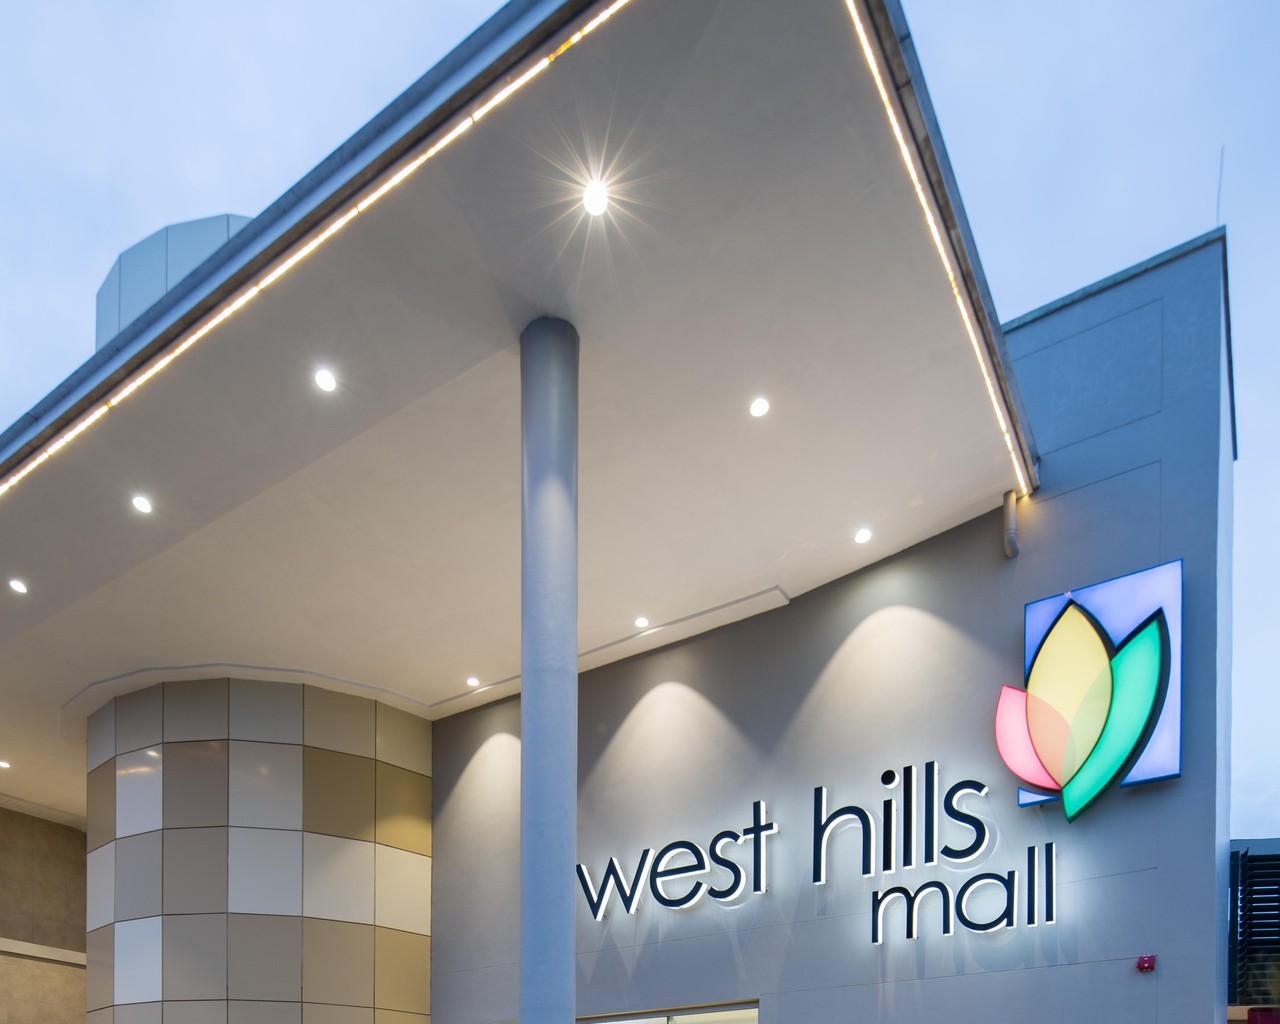 Man’s death at West Hills: Management shocked by incidence